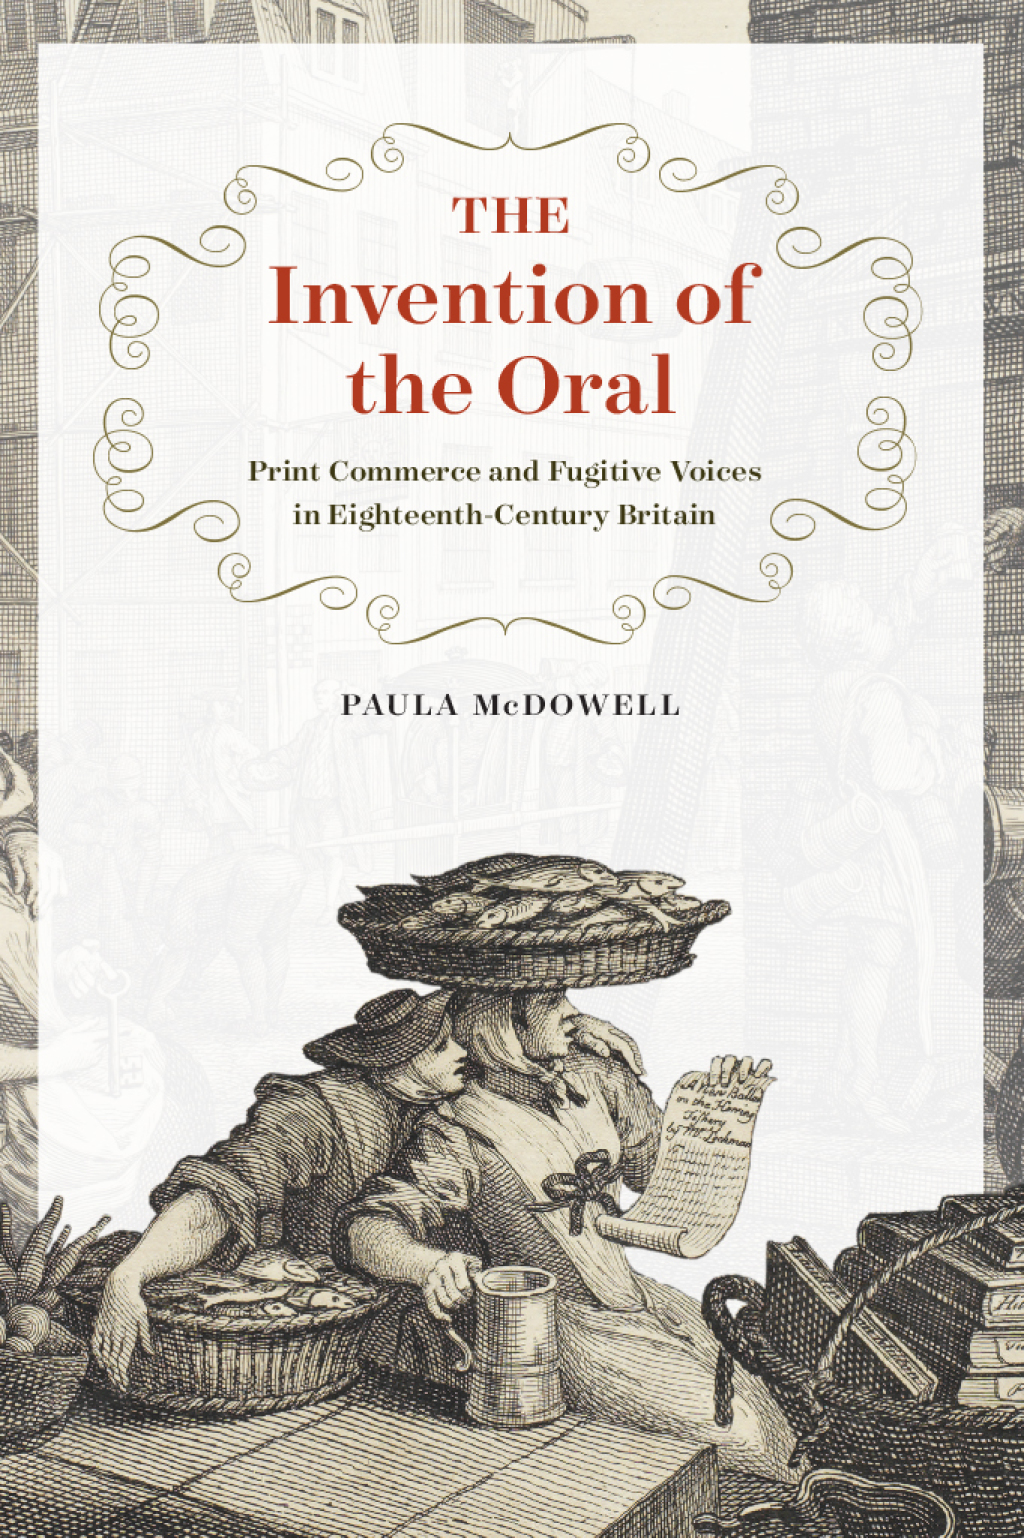 The Invention of the Oral (eBook) - Paula McDowell